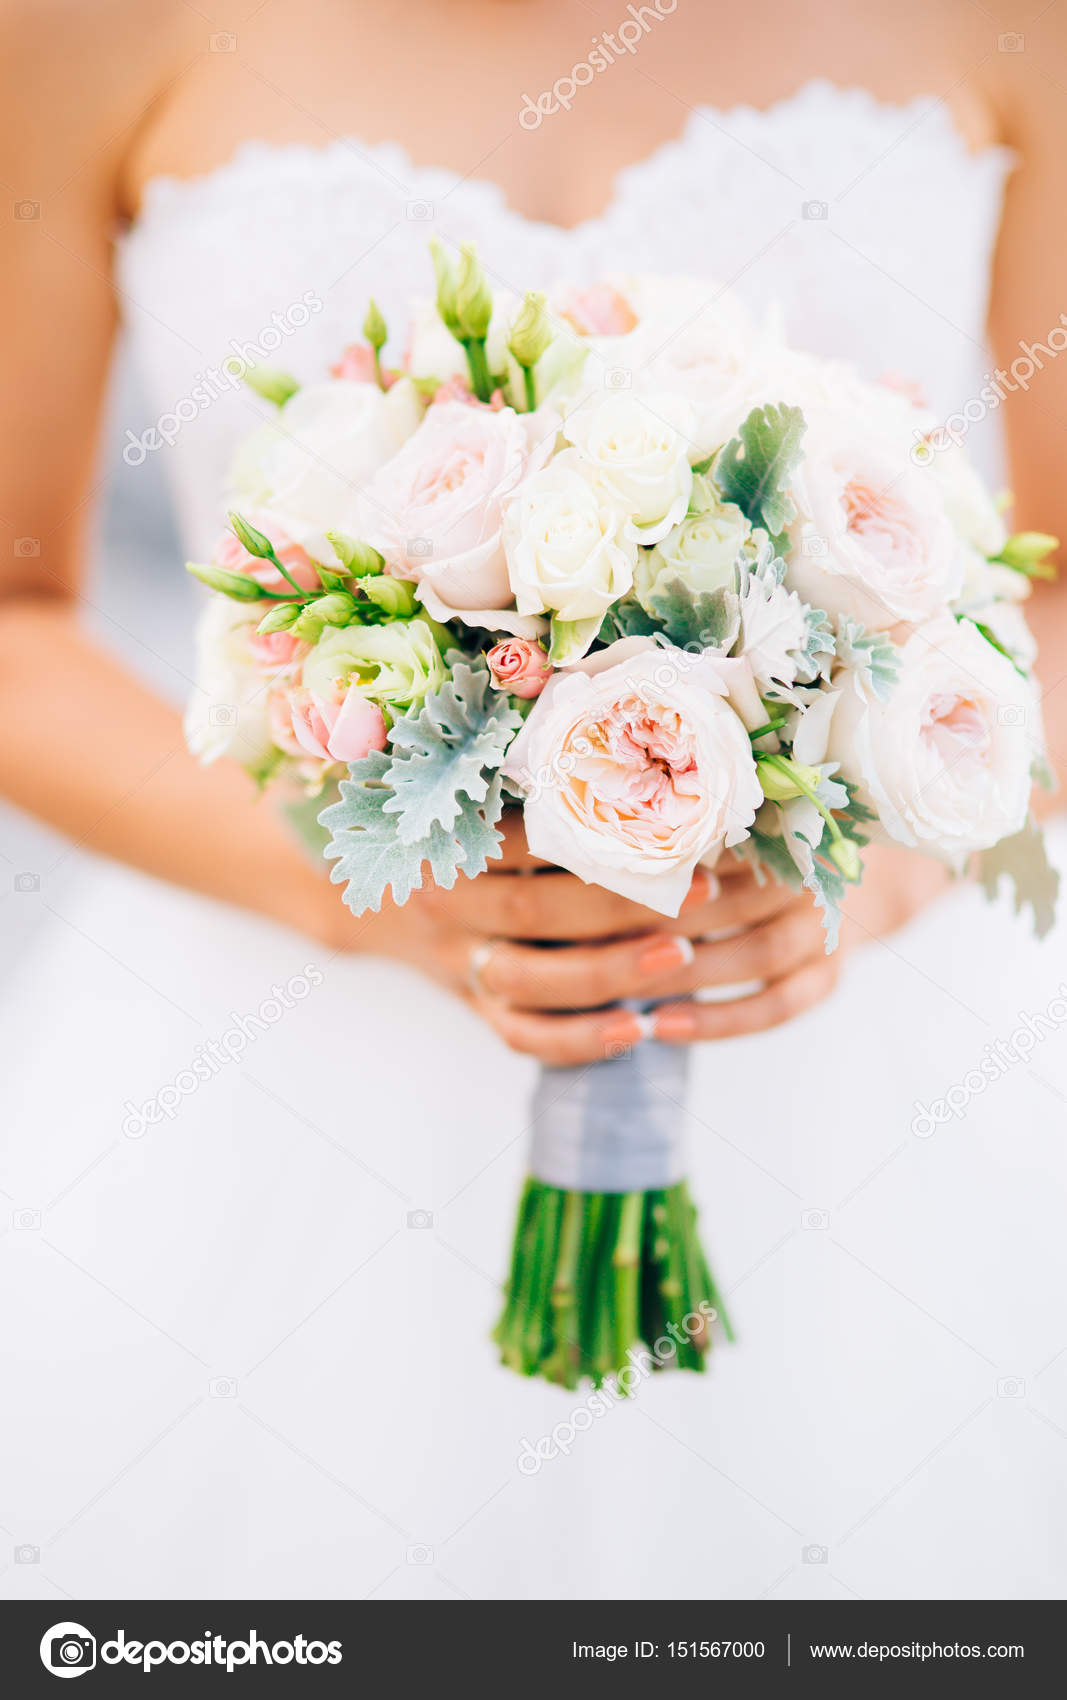 Bouquet Sposa Lisianthus.Wedding Bridal Bouquet Of Lisianthus And Cineraria Silver In The